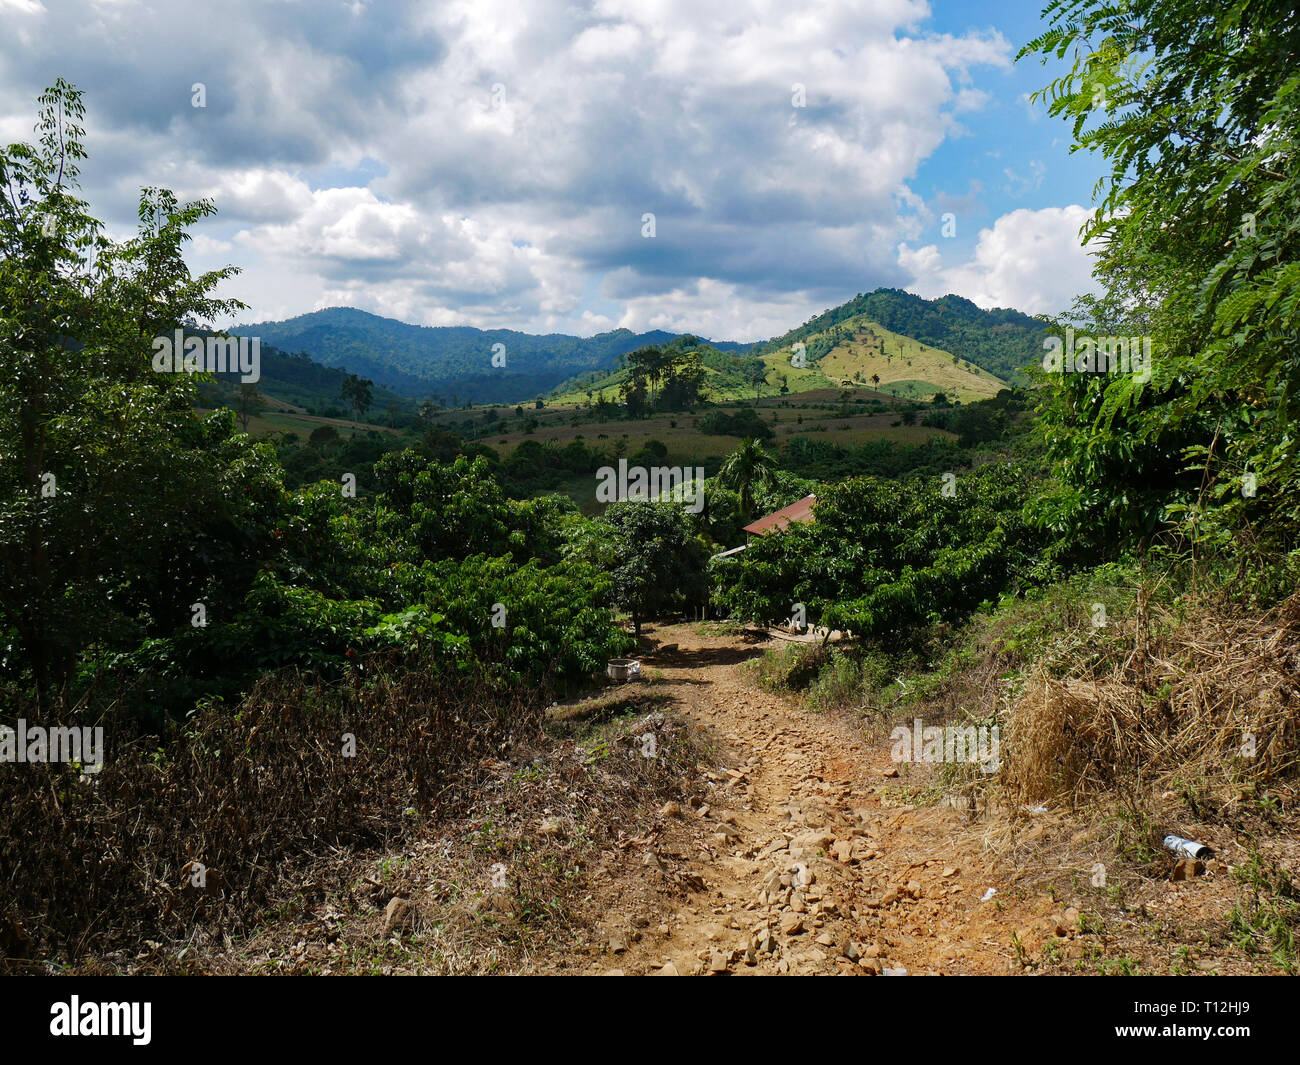 Cambodia. Beautiful countryside in Pailin Province. A stony track leads down into a valley with tropical vegetation and mountains in the background Stock Photo